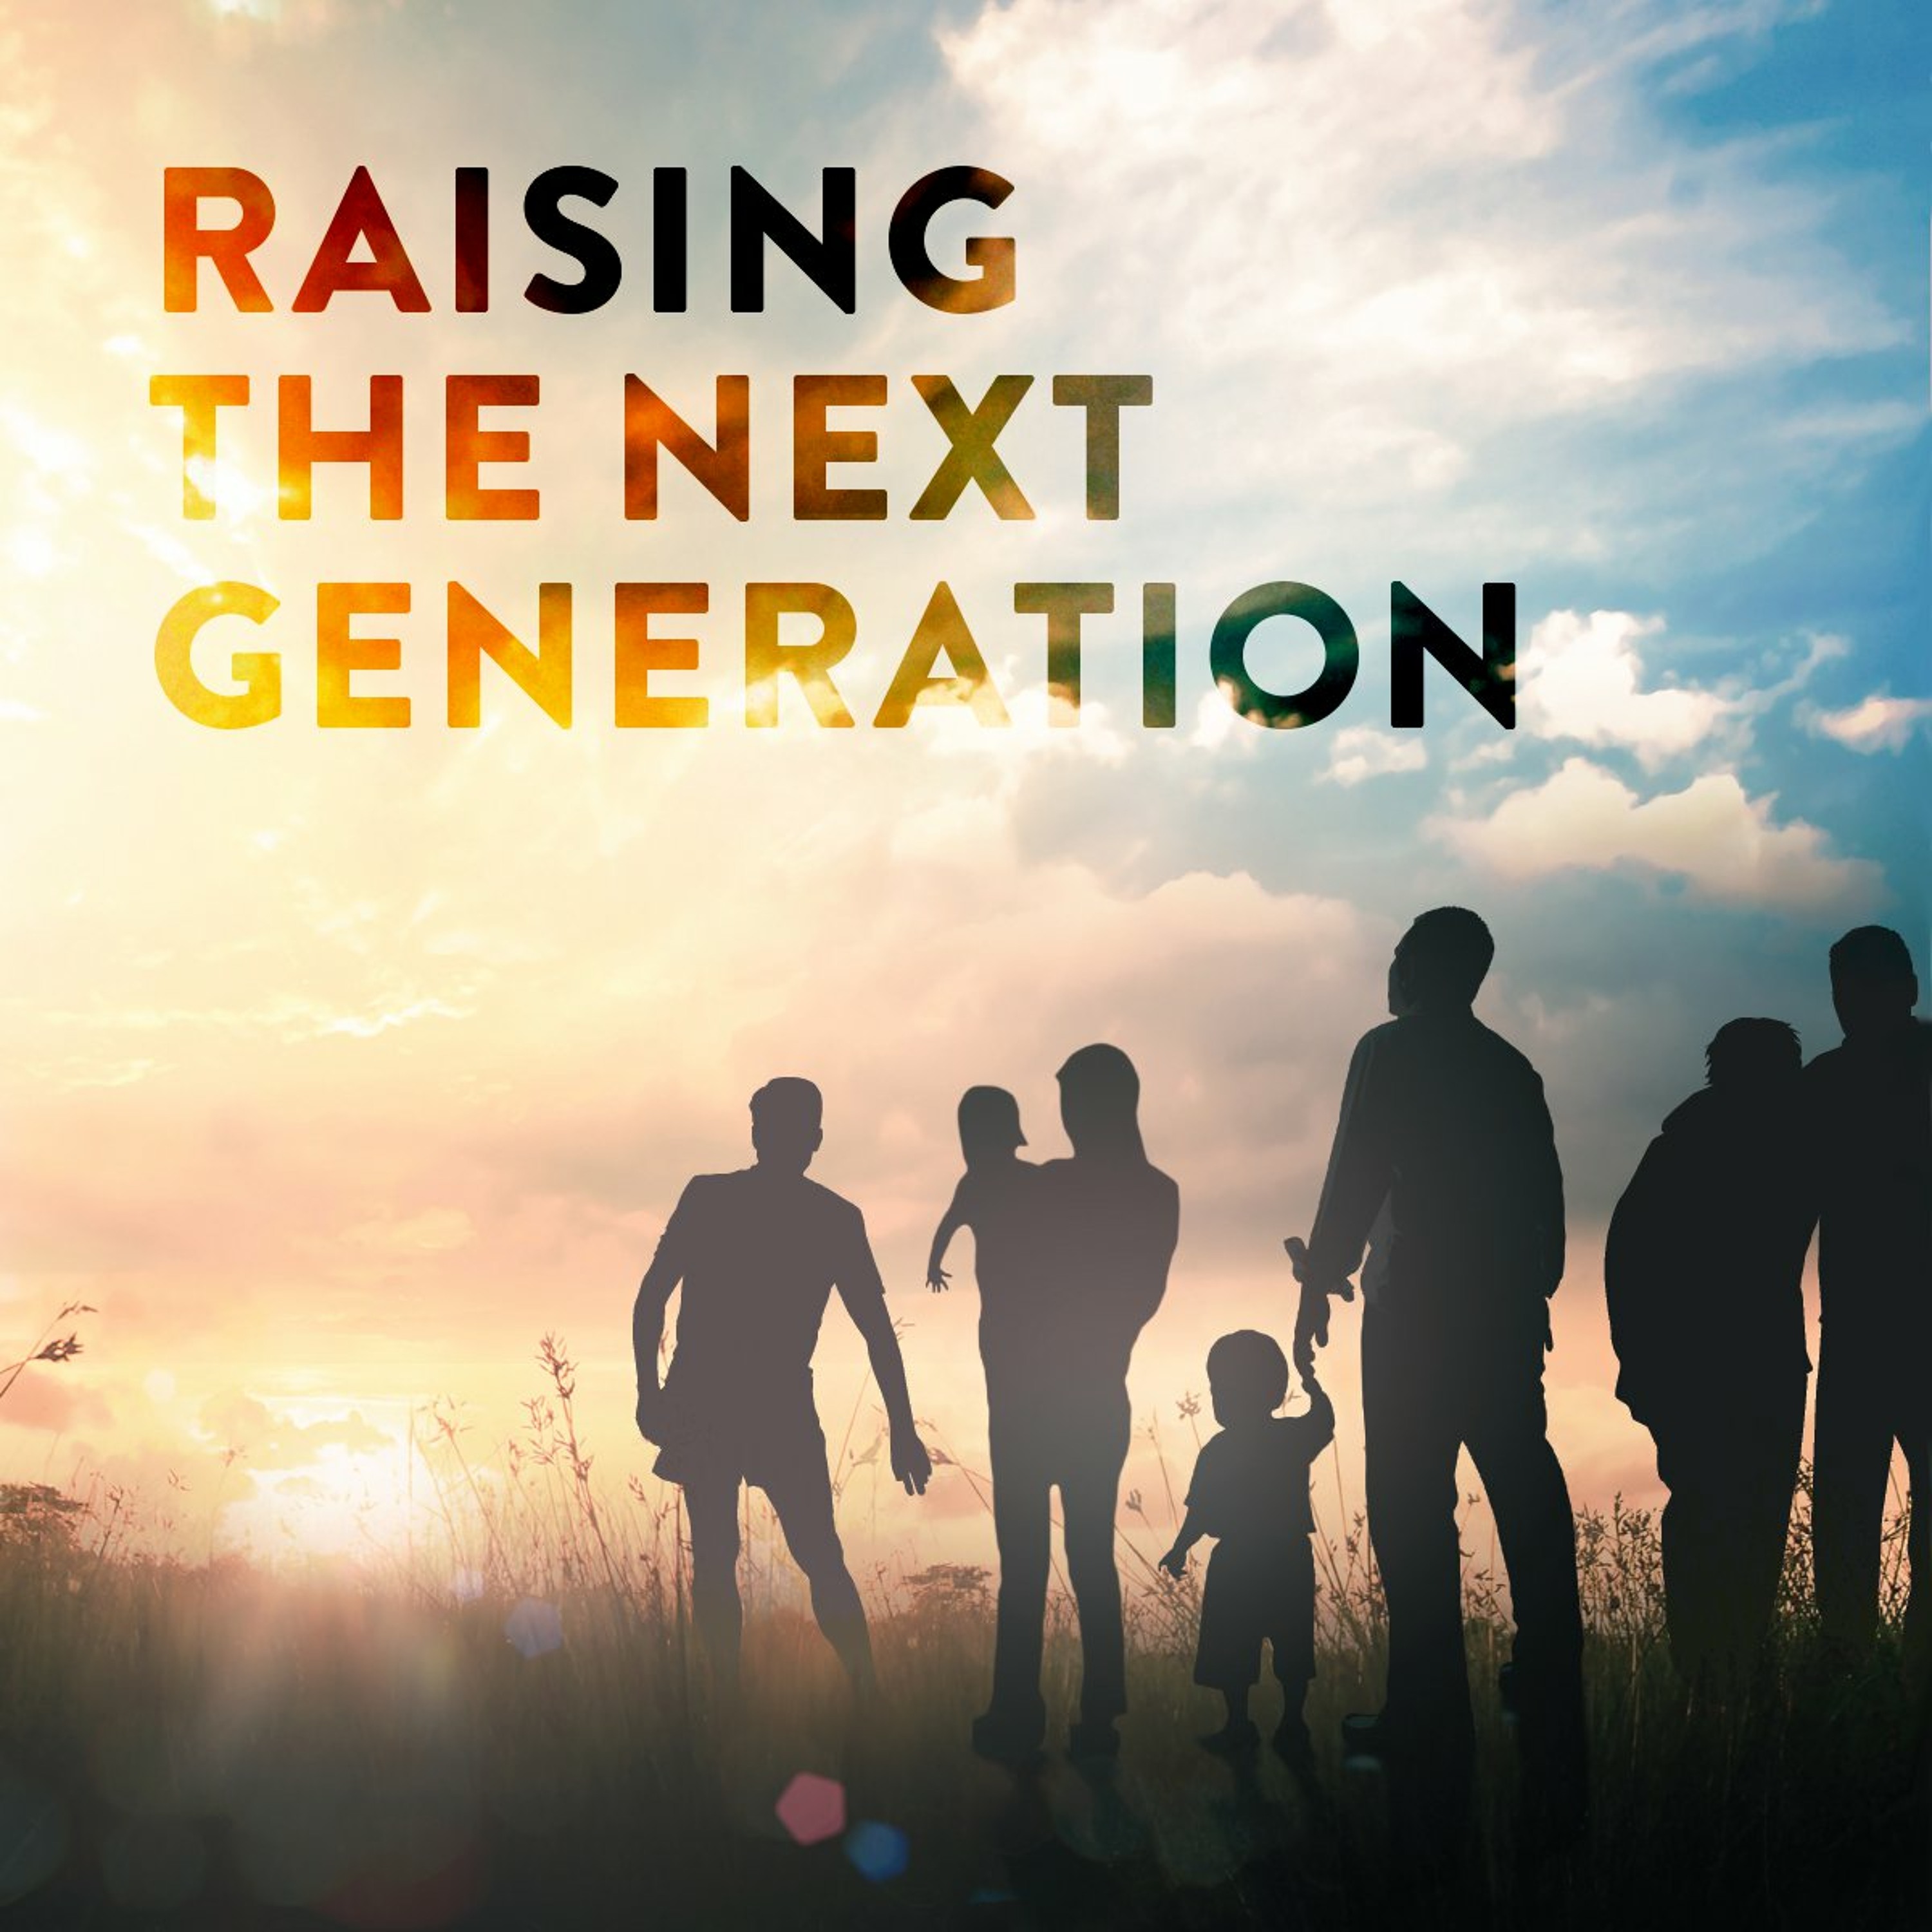 070: Raising the next generation with Mark Earngey, Paul Dudley and Ruth Lukabyo